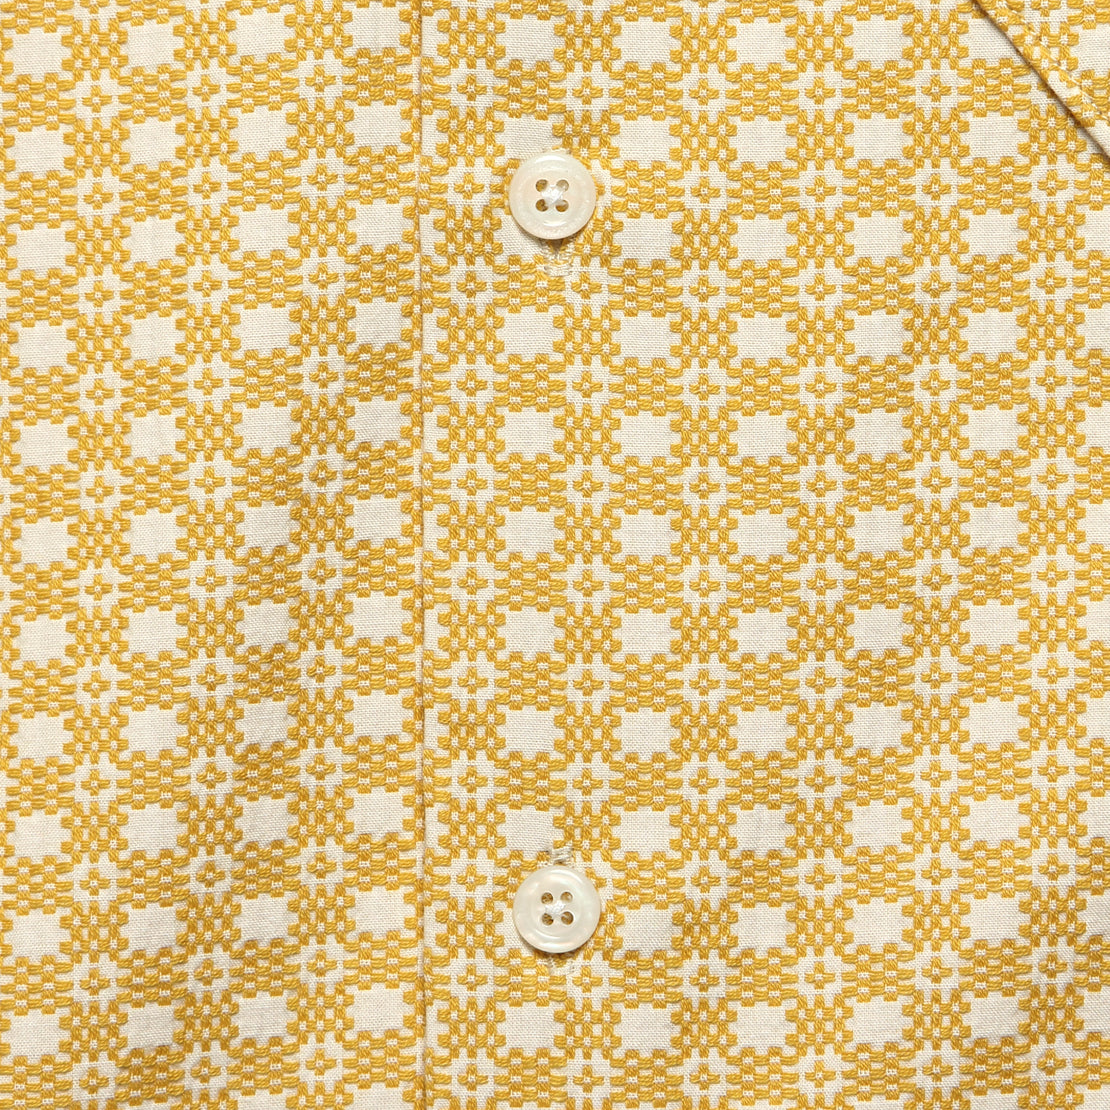 Tile Road Shirt - Yellow/White - Universal Works - STAG Provisions - Tops - S/S Woven - Other Pattern